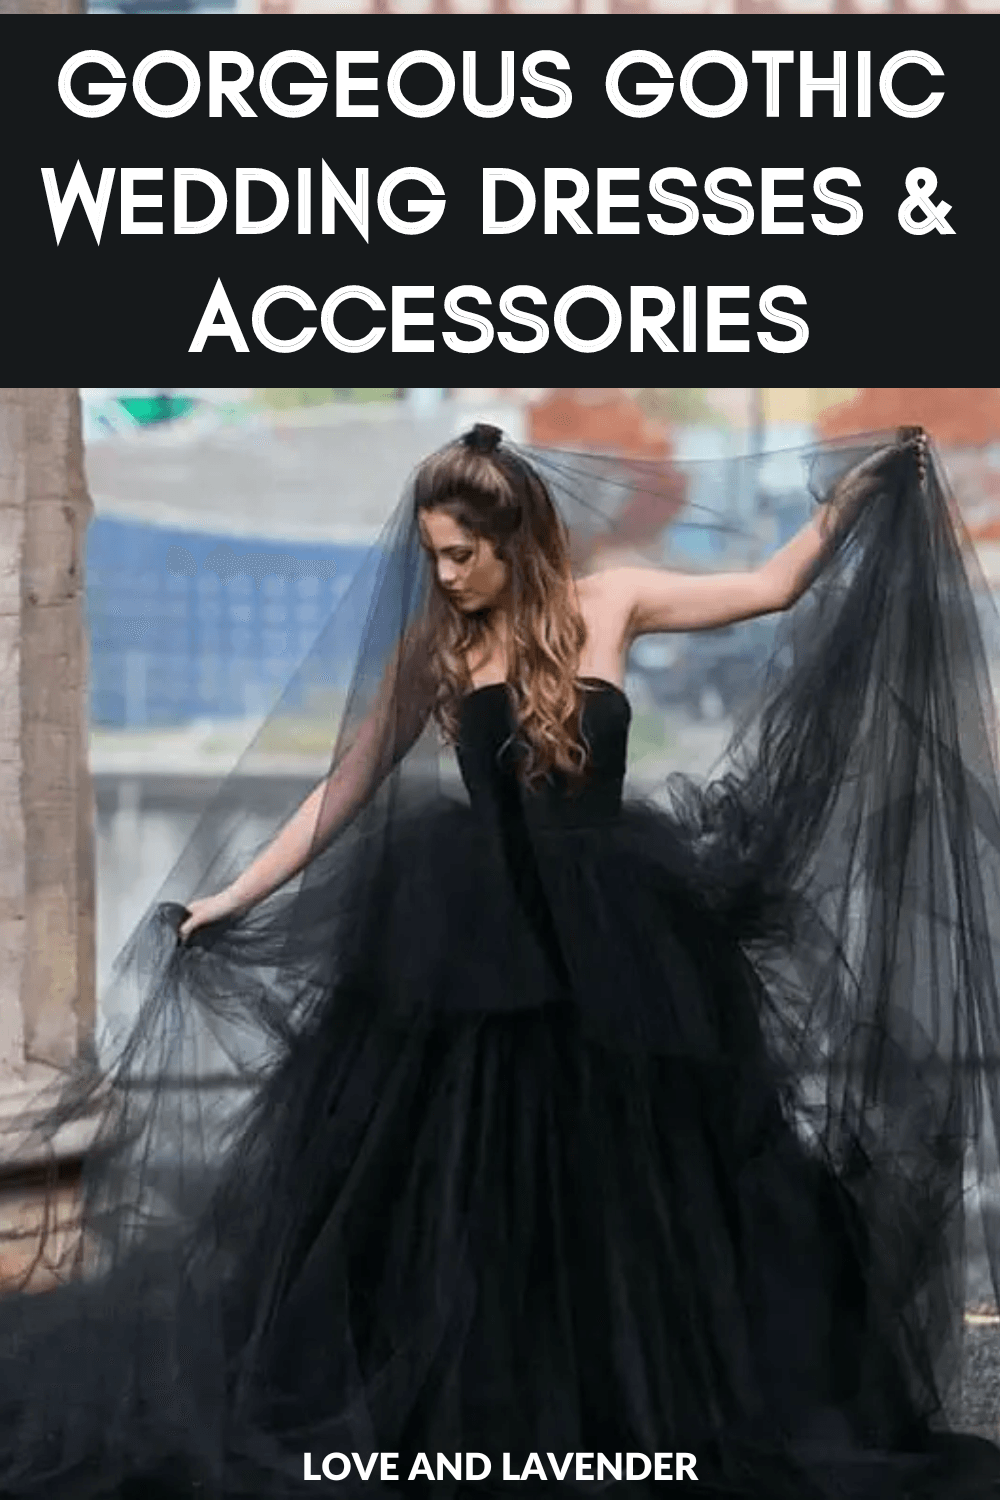 There are many different styles when it comes to Gothic wedding dresses. There is something about a Gothic wedding dress that is stunning and romantic. The best thing about having a gothic wedding is that everyone can show their personality through clothes and accessories. Here is a list of the best Gothic wedding dresses that we found.